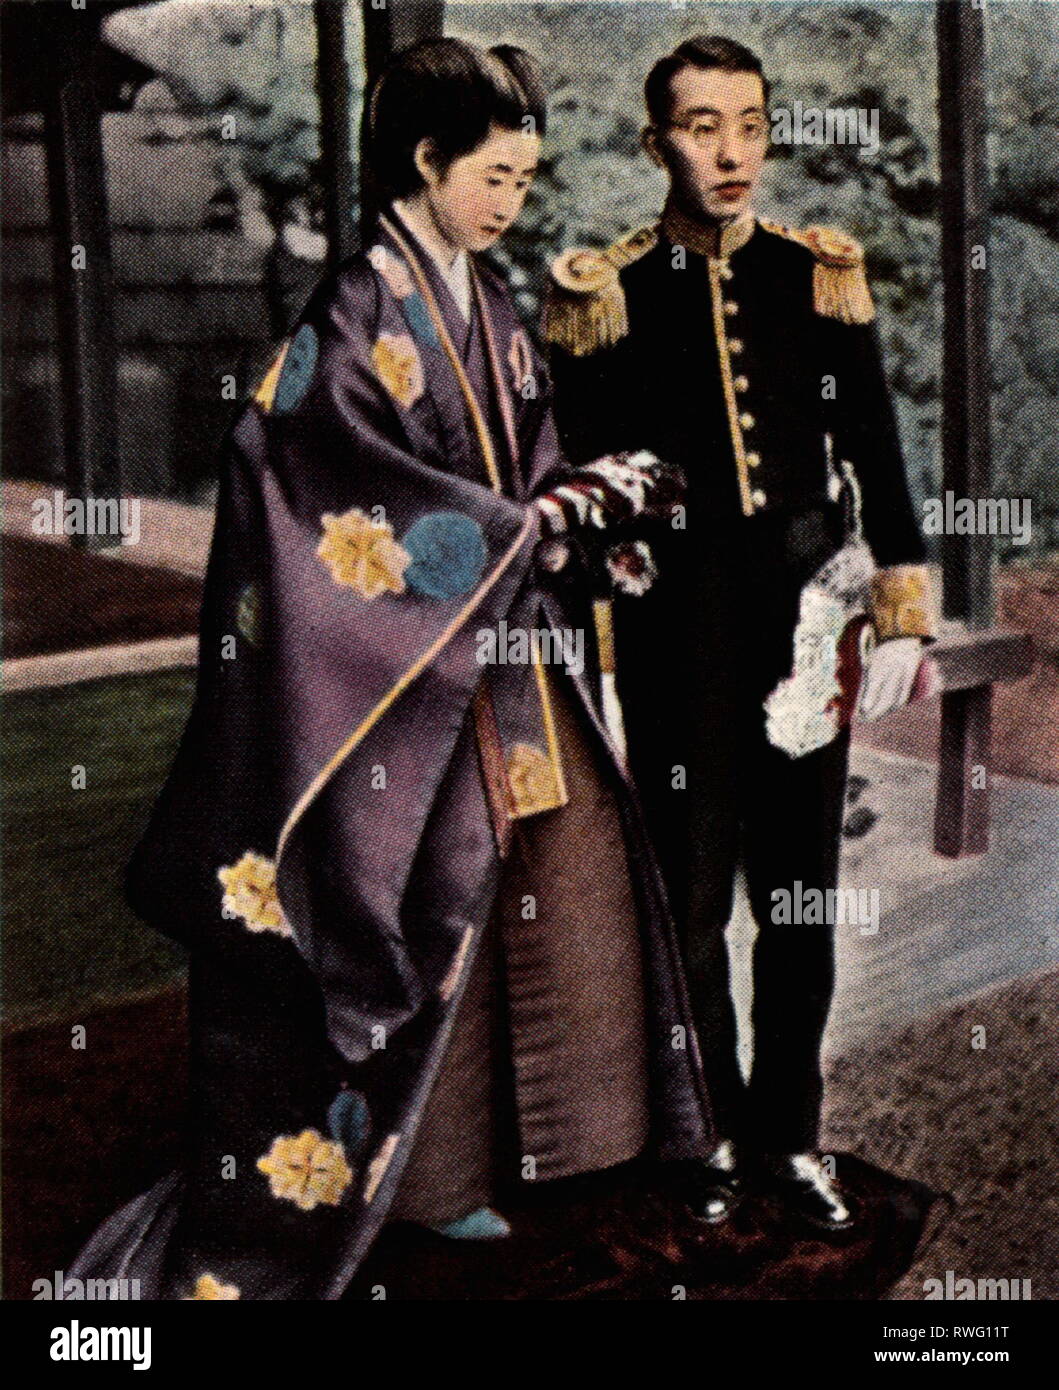 Hirohito, 29.4.1901 - 7.1.1989, Emperor of Japan 25.12.1926 - 7.1.1989, full length, with wife Empress Kojun, late 1920s, coloured photograph, cigarette card, series 'Die Nachkriegszeit', 1935, Additional-Rights-Clearance-Info-Not-Available Stock Photo